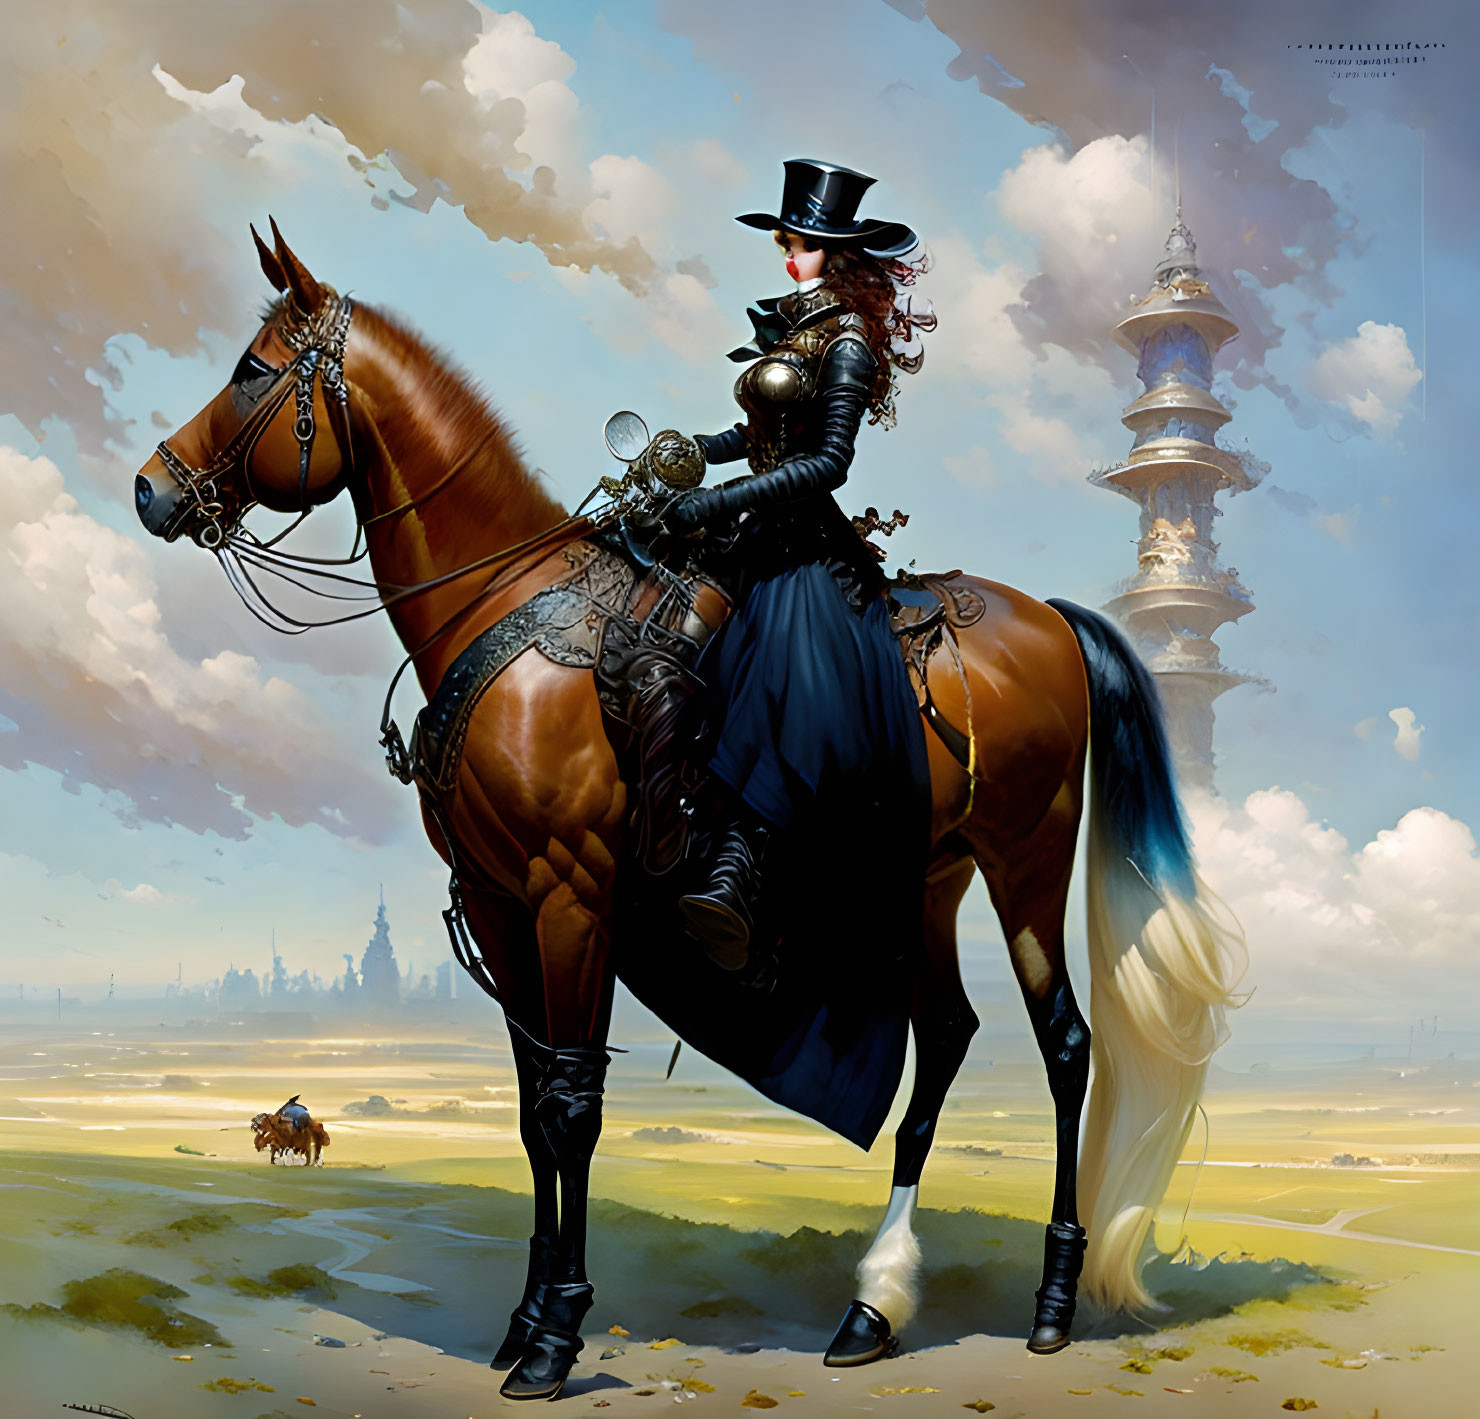 Steampunk-themed illustration of a woman on a mechanical horse in futuristic landscape